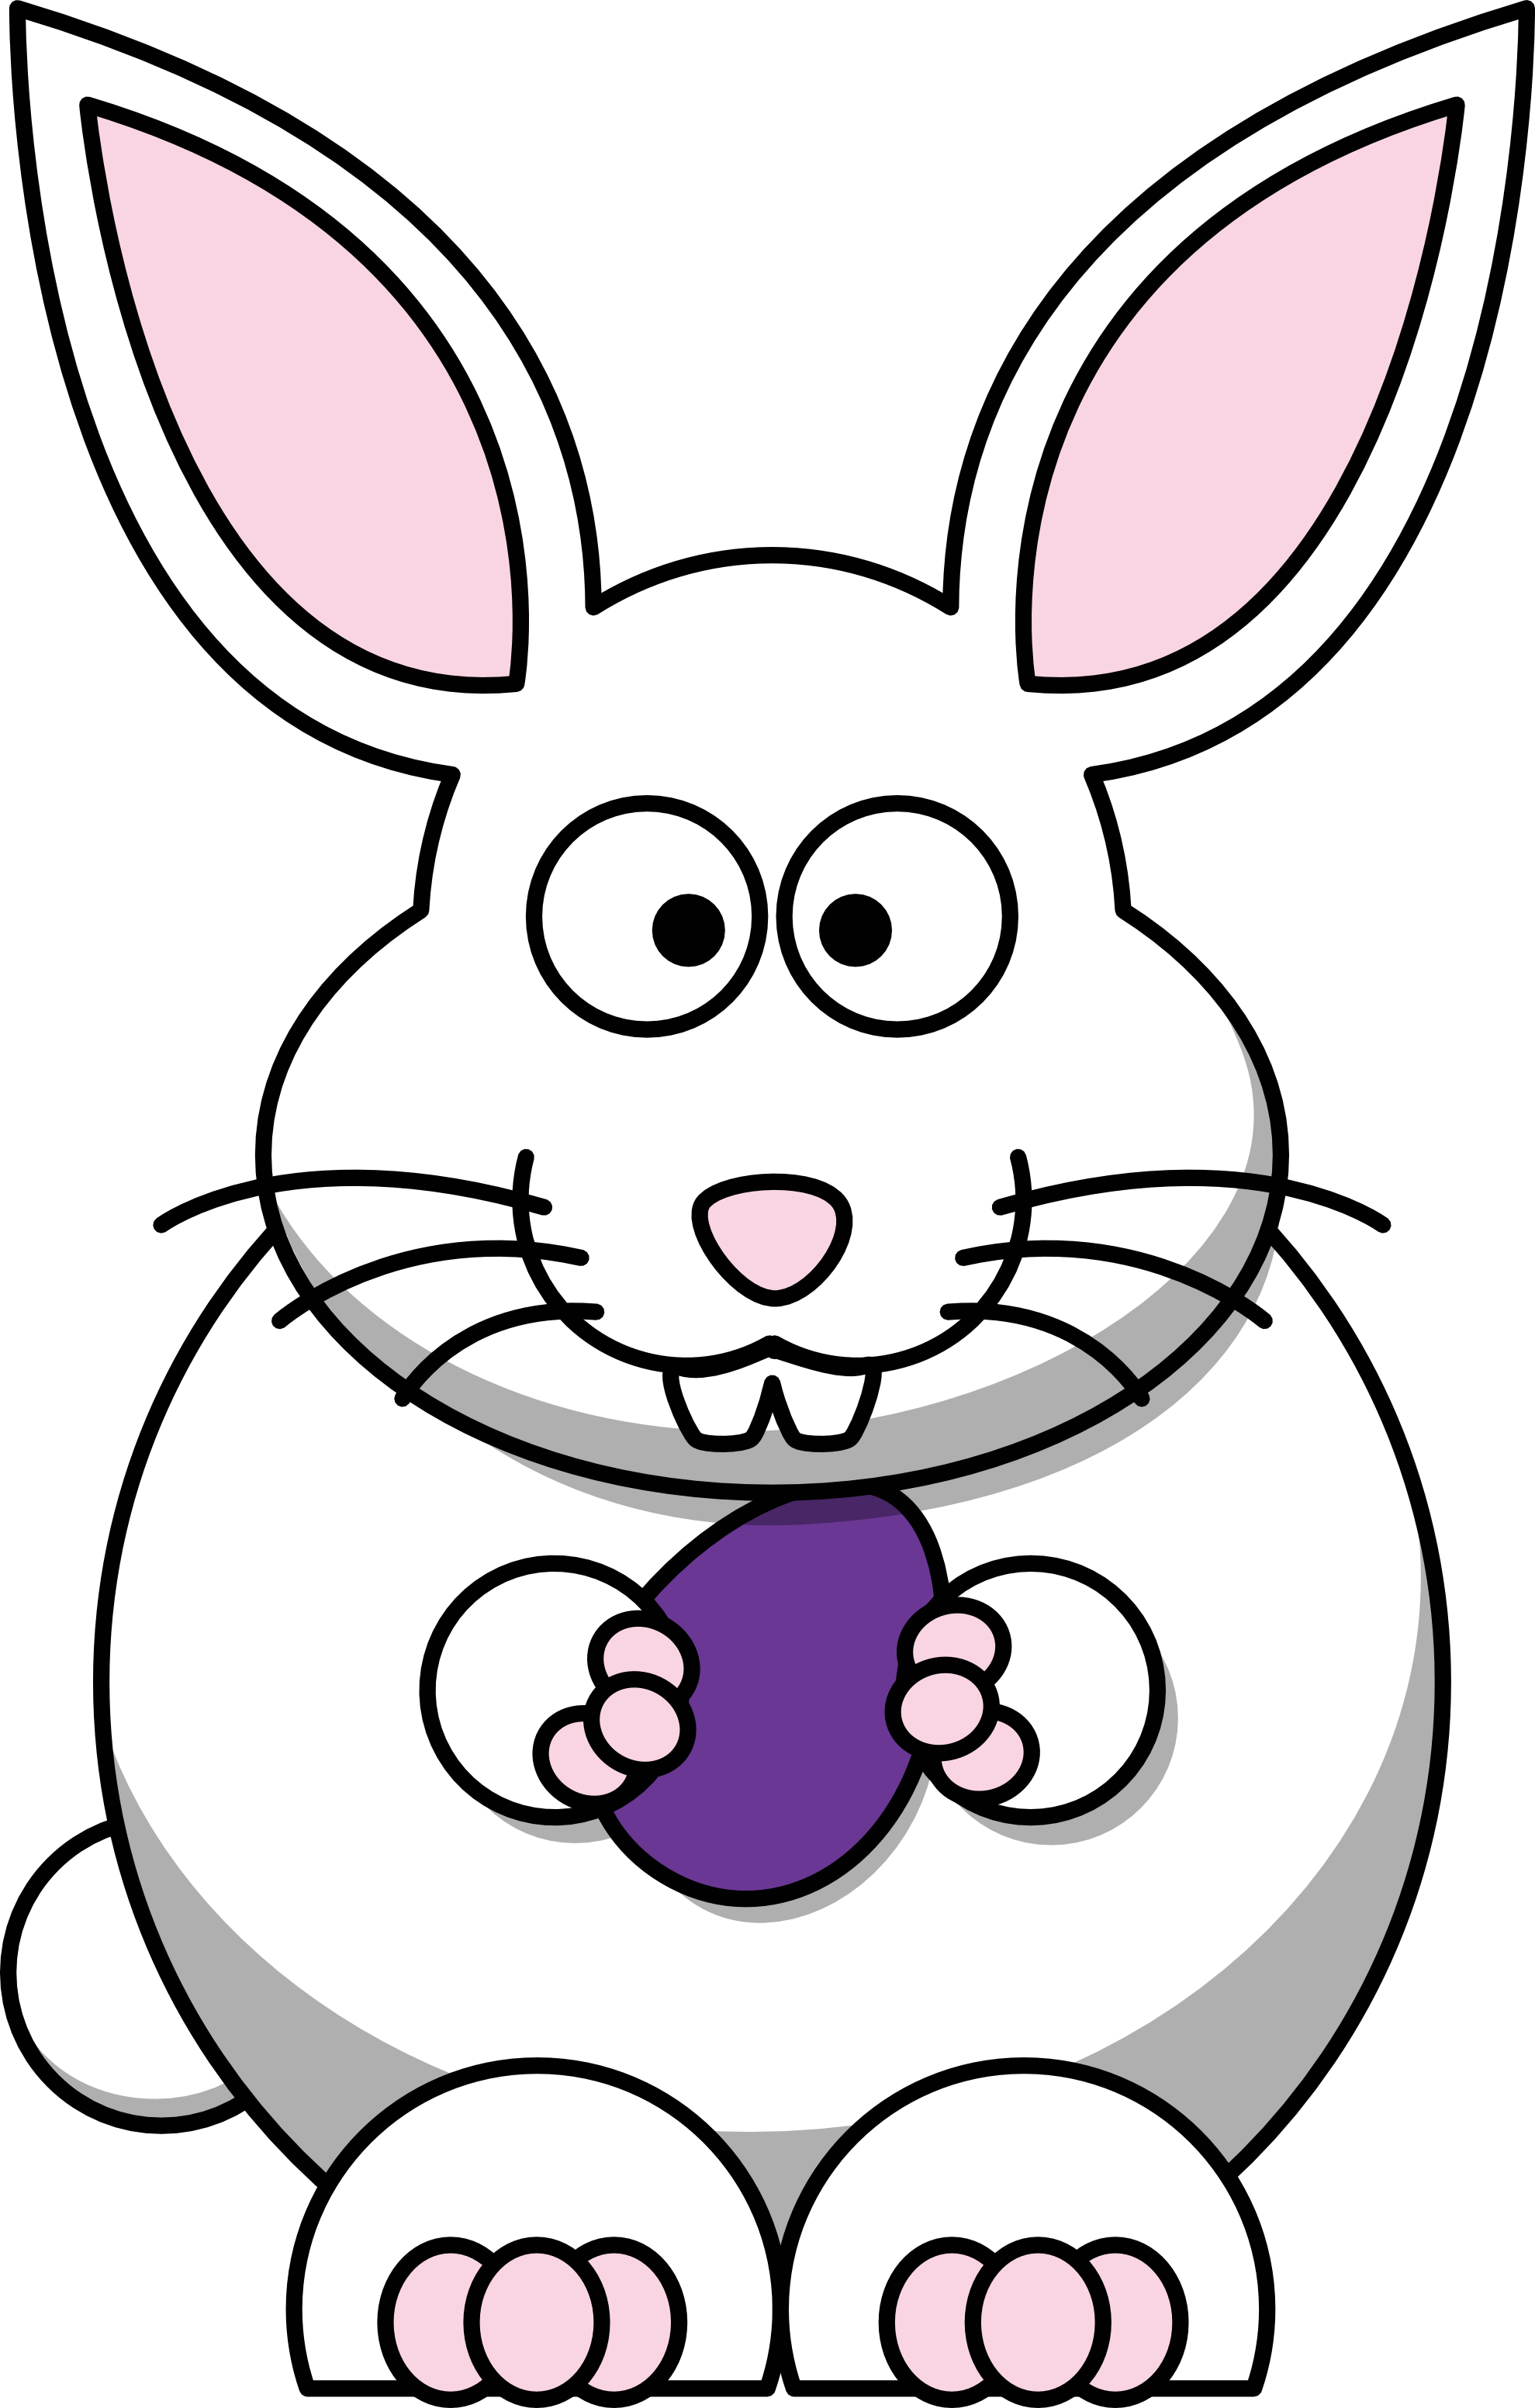 Ear clipart white rabbit.  collection of high